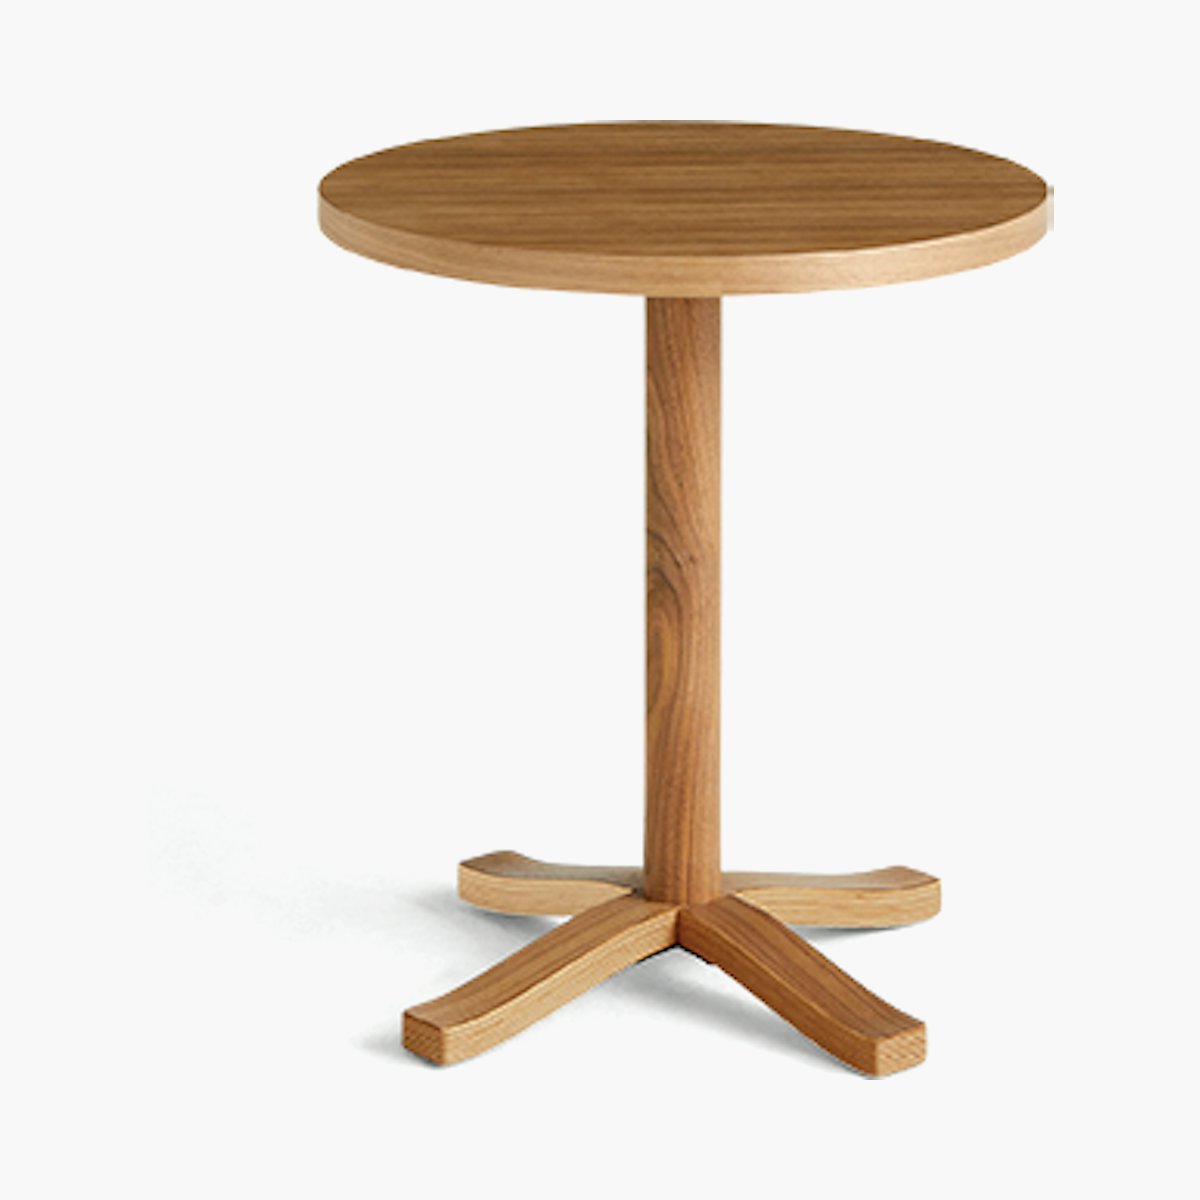 Pastis Side Table